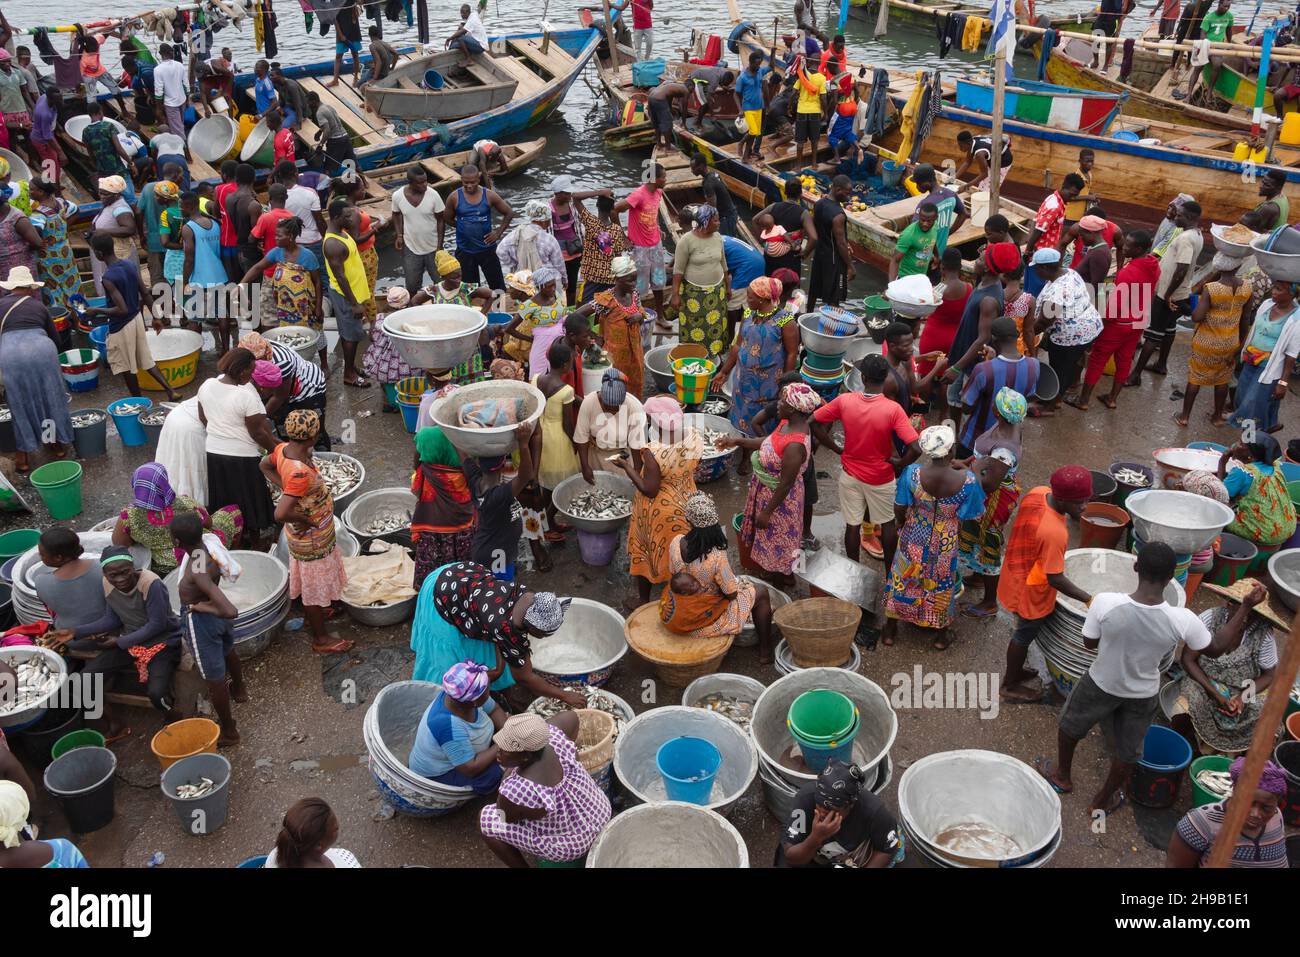 People waiting for the fishing boats to come into the harbor, Elmina, Central Region, Ghana Stock Photo